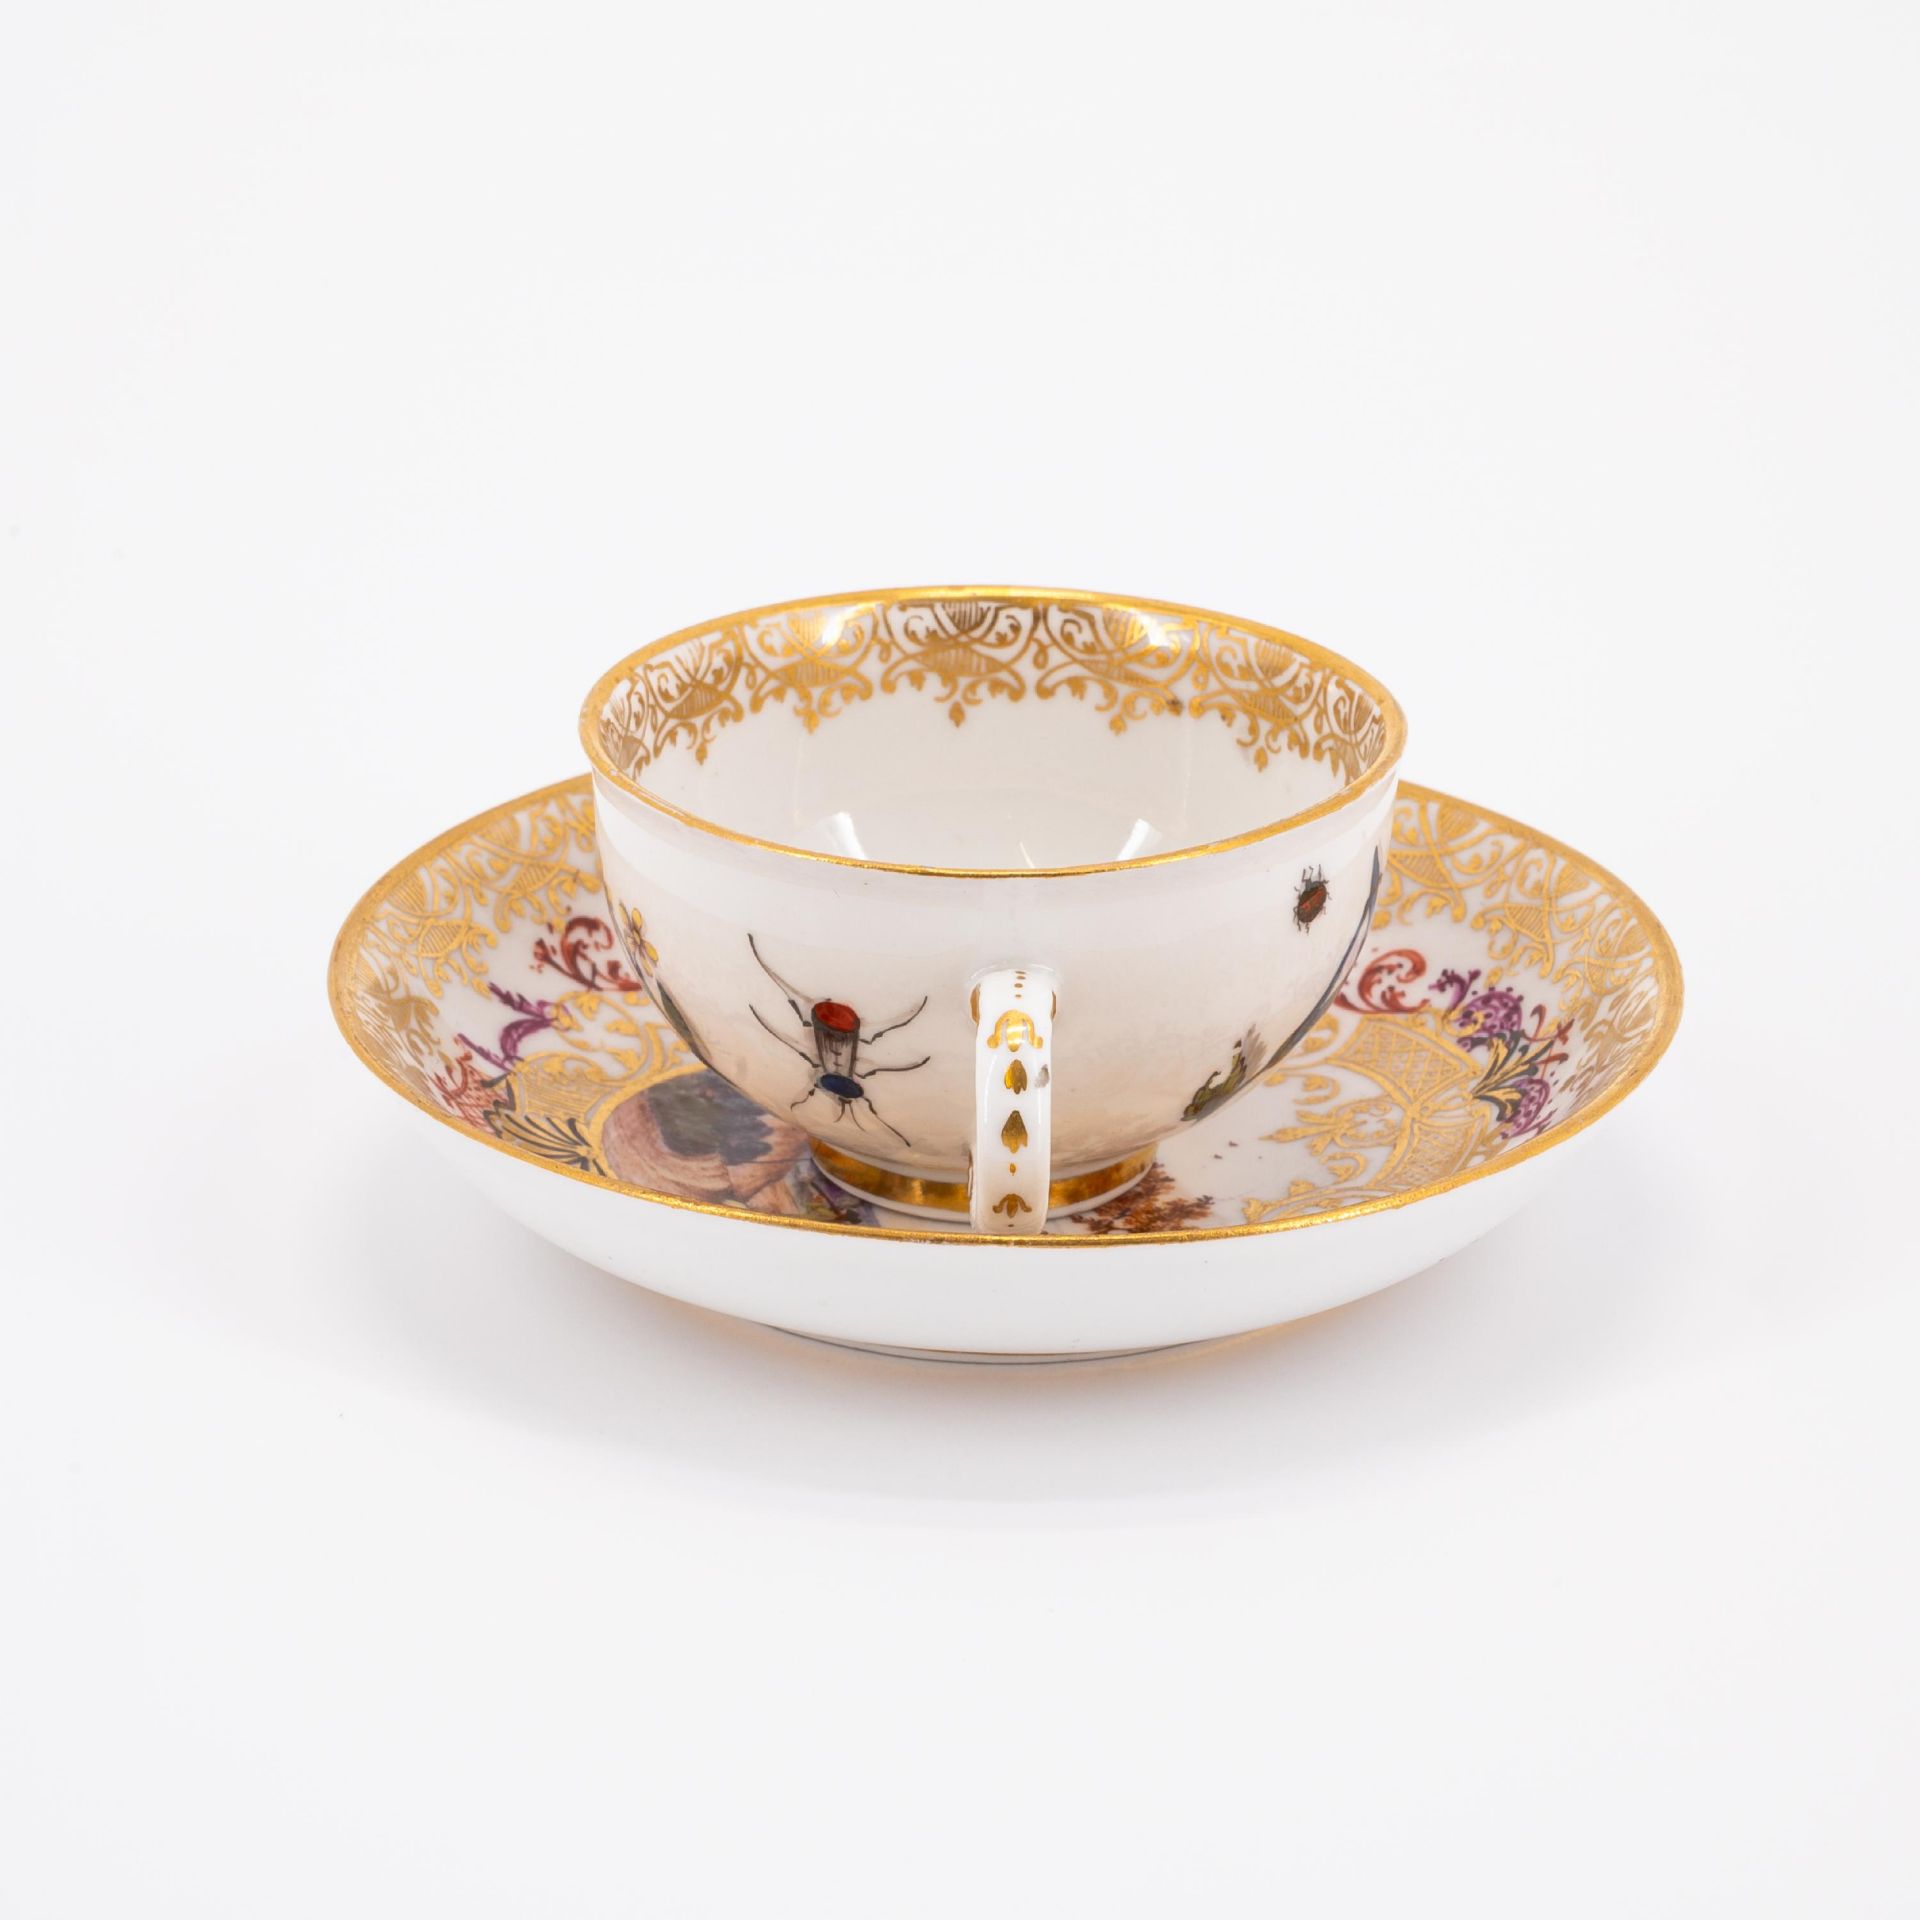 Meissen: CUP AND SAUCER WITH LARGE GOLD CARTOUCHES AND HUNTING SCENES - Image 3 of 6